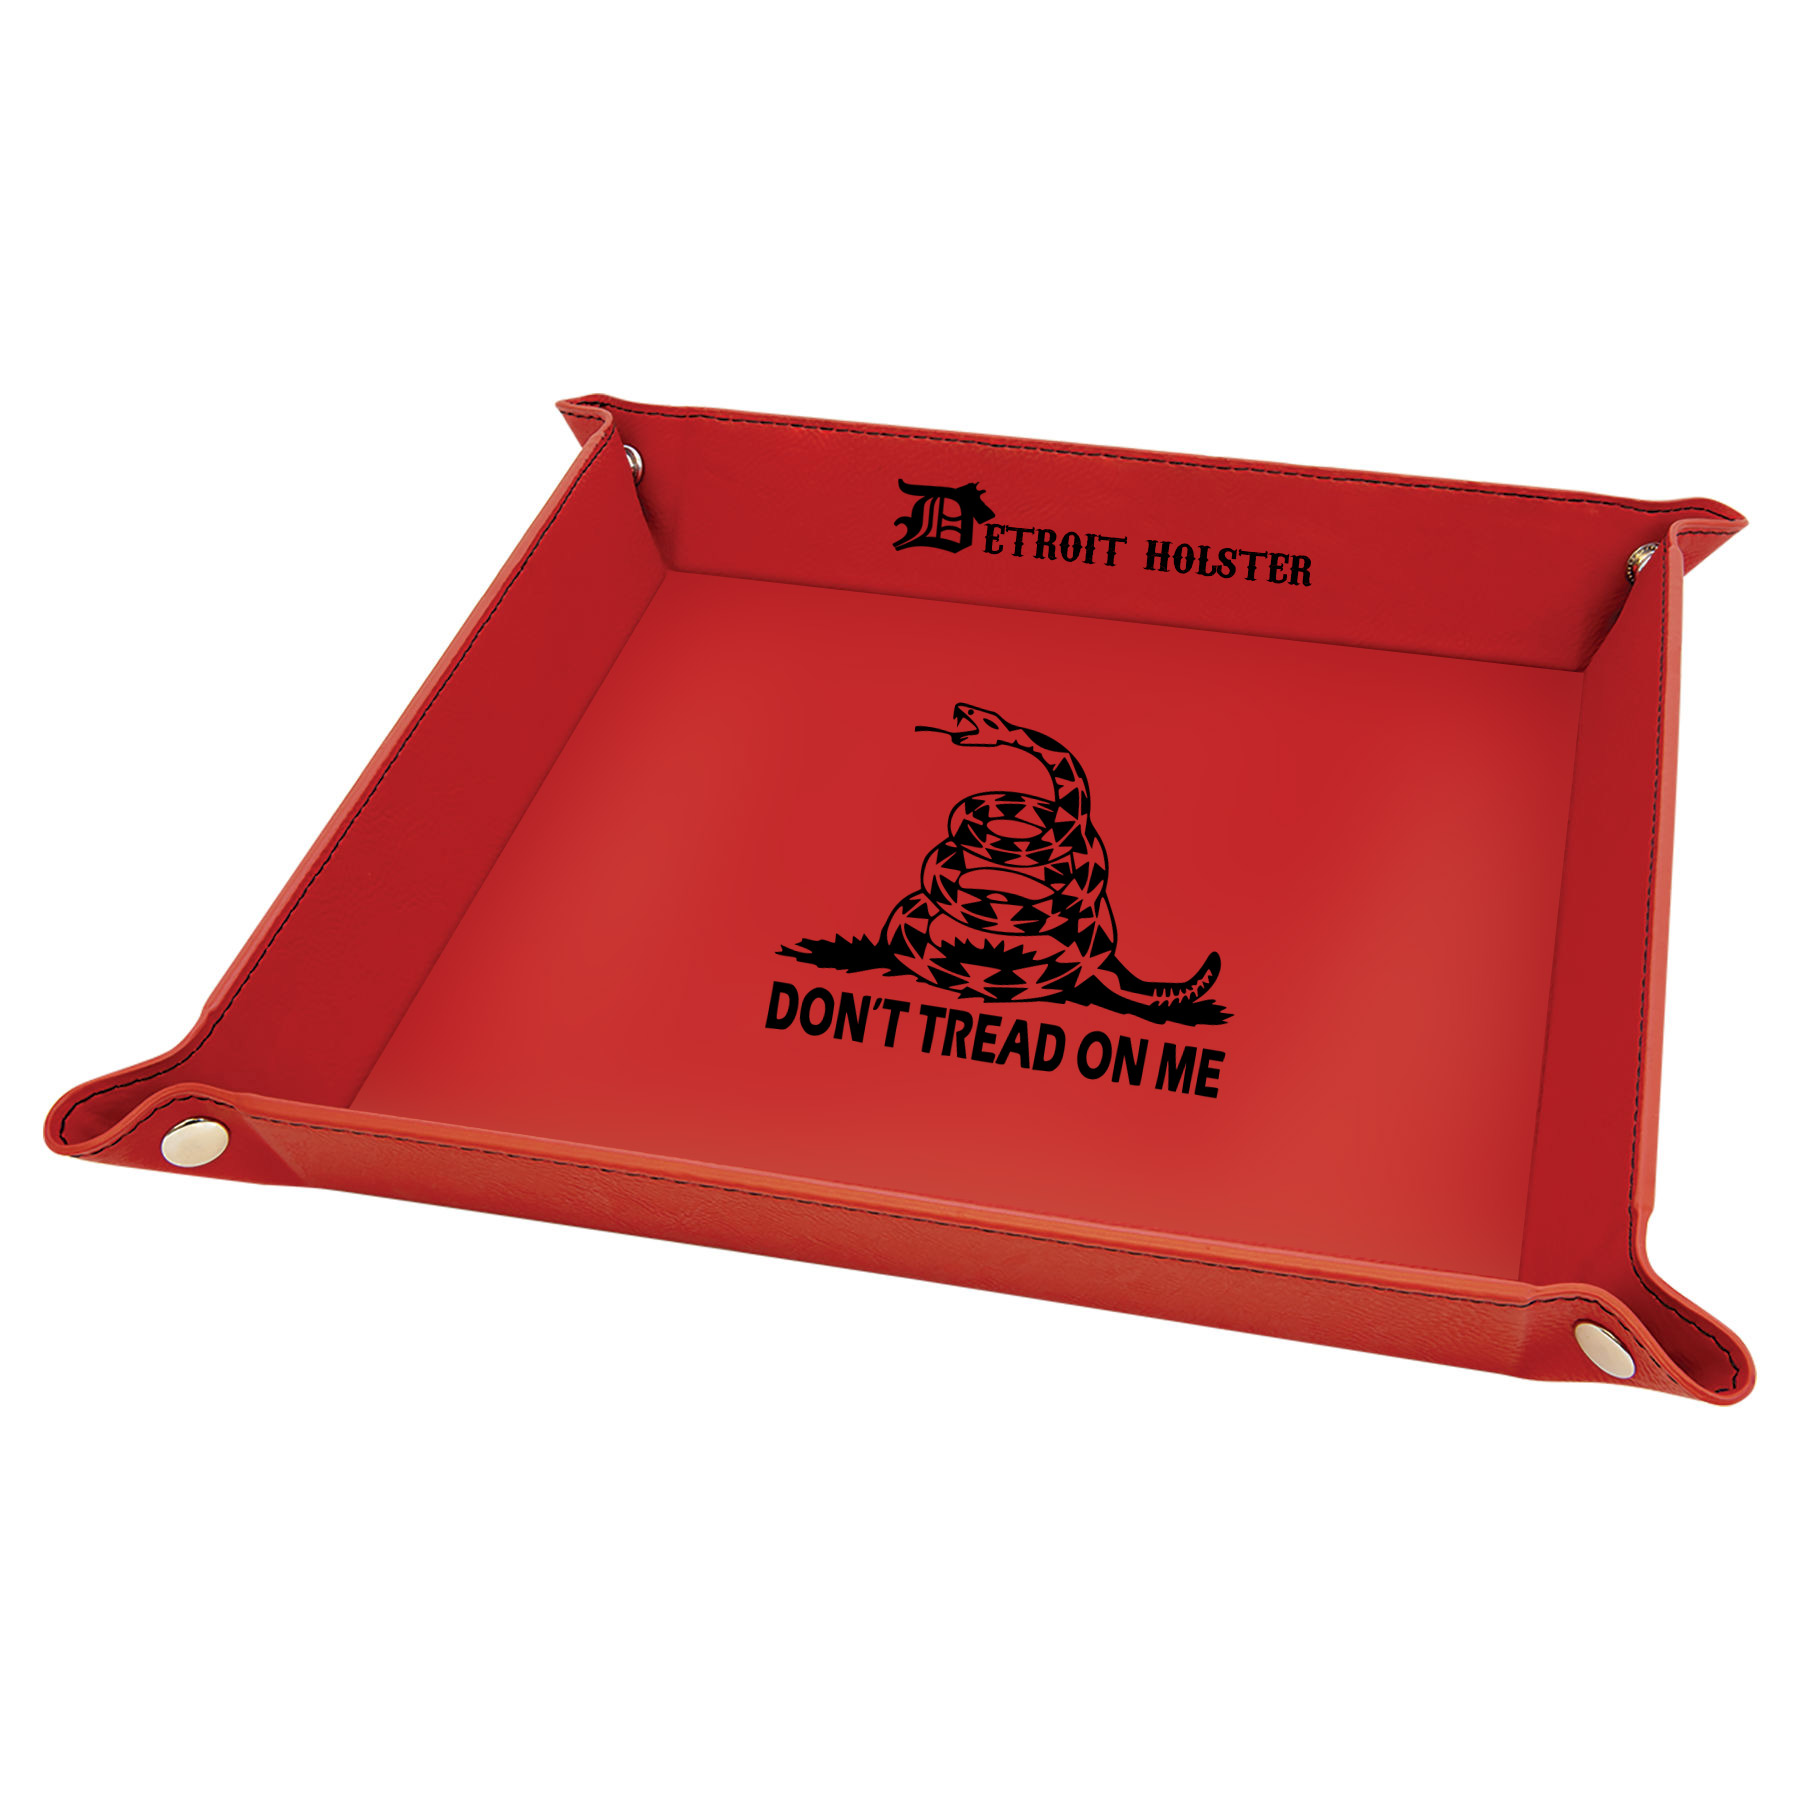 Leatherette-Dump-Tray_red_GadsdenFlag